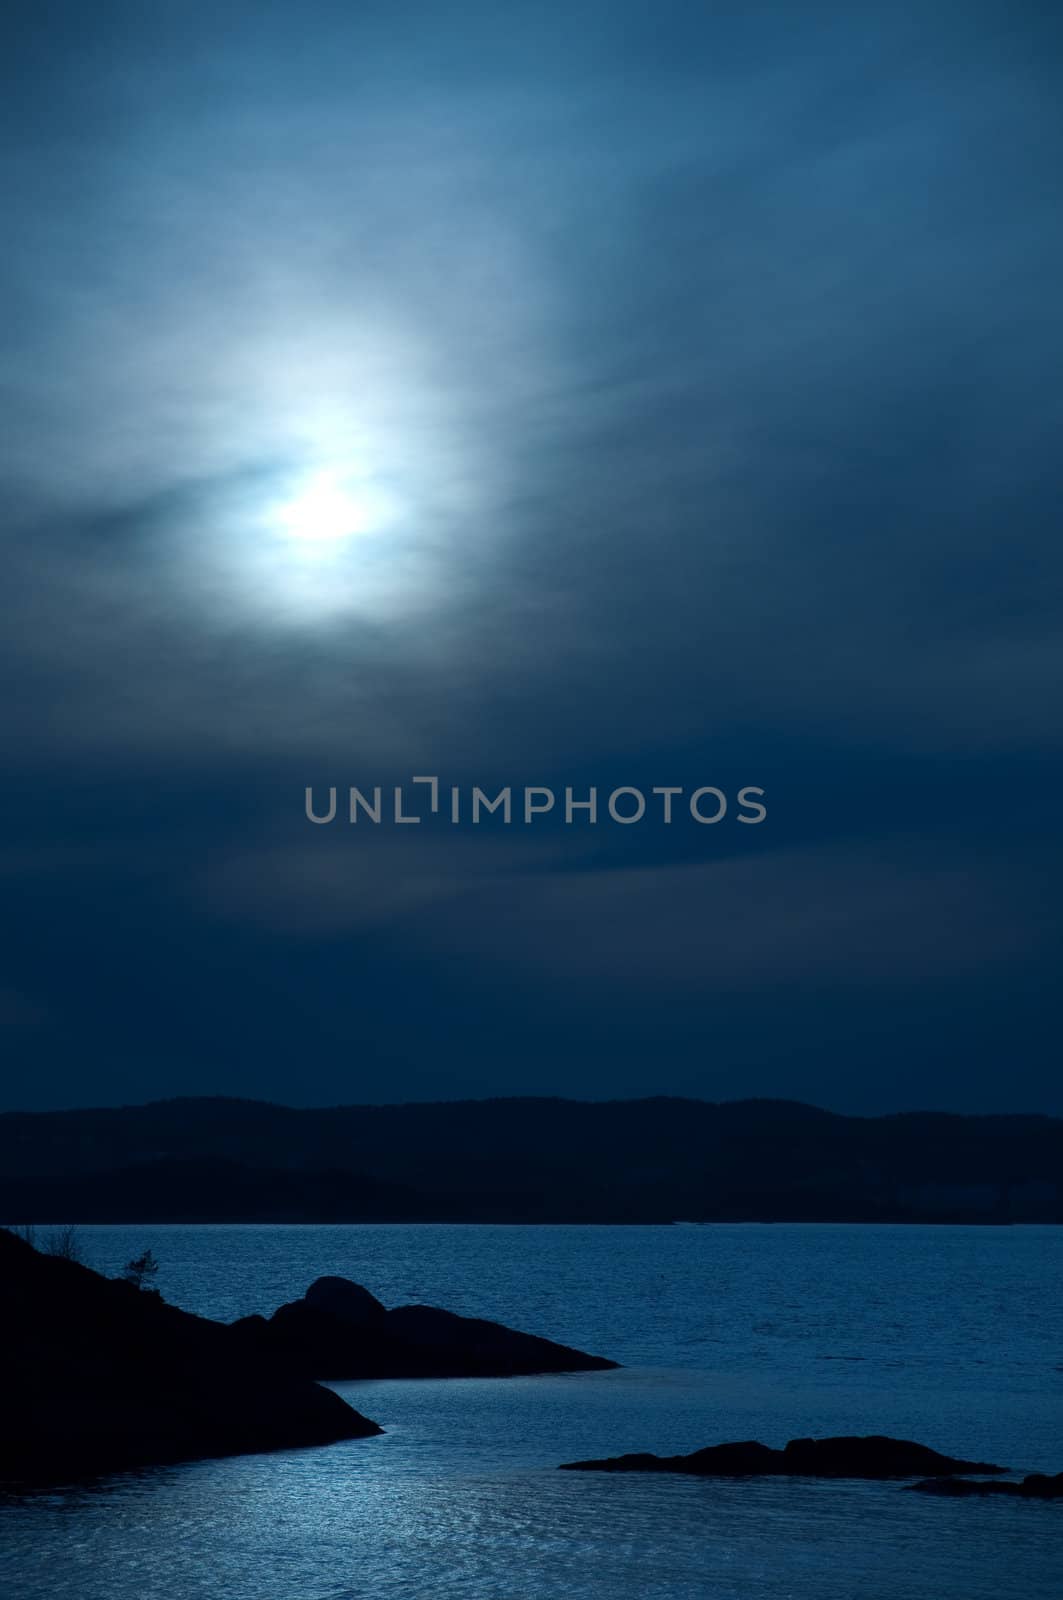 Scenic ocean view in the moonlight with hills in the background